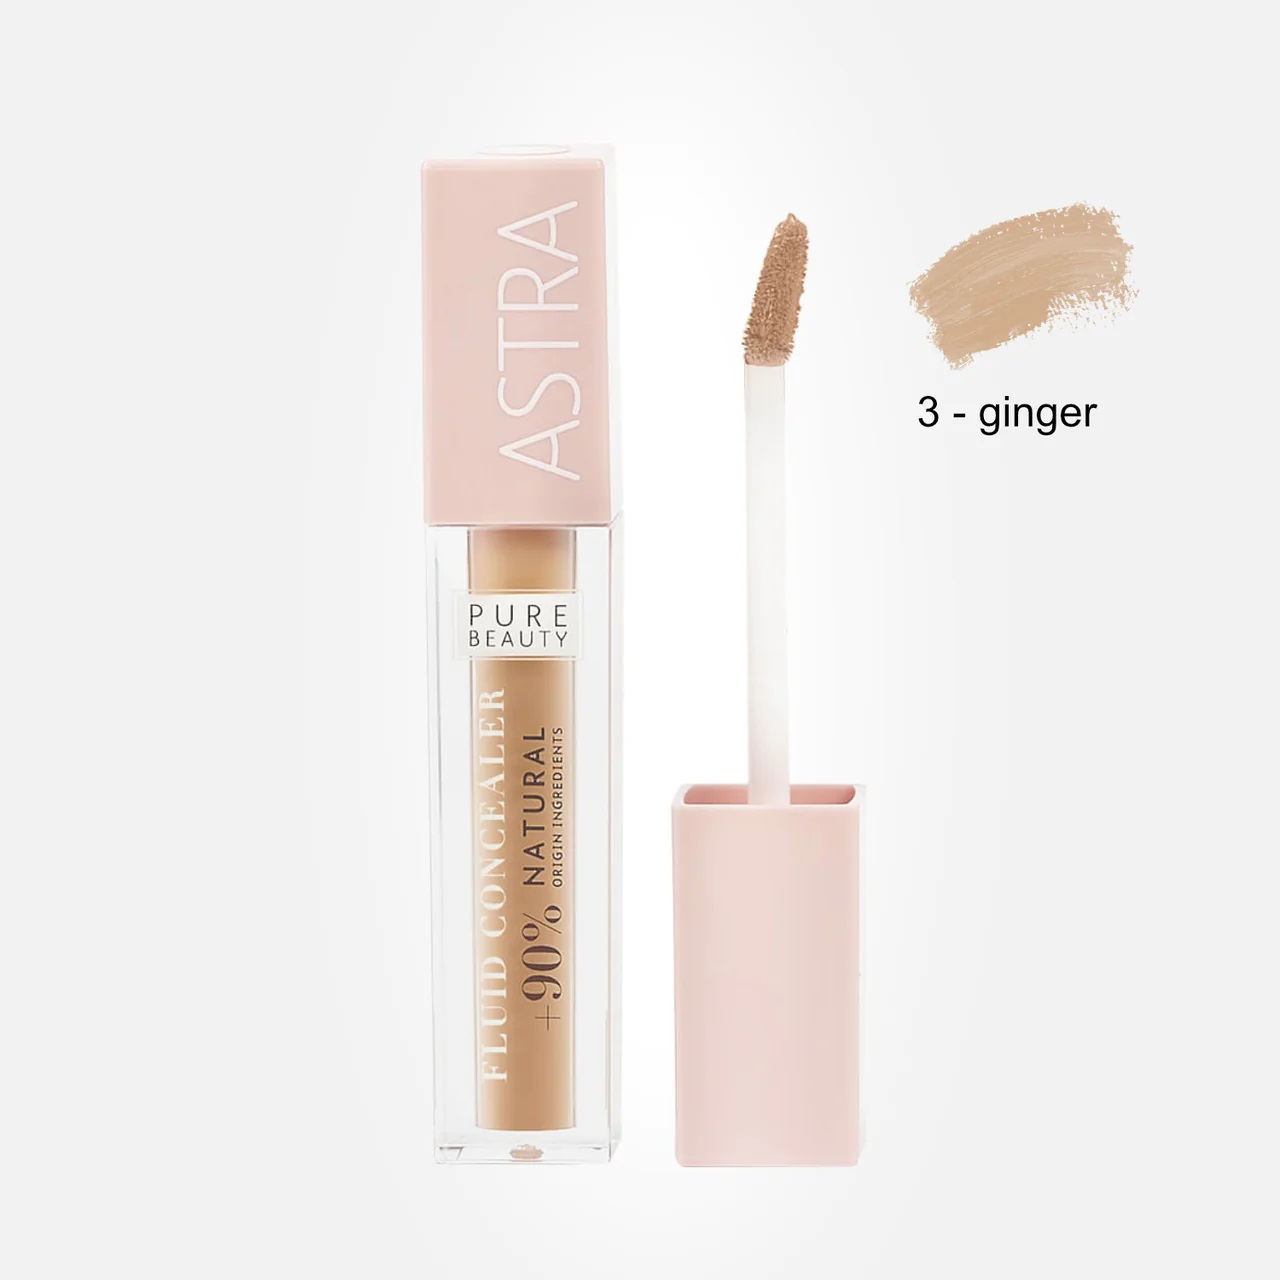 Image of Fluid Concealer 3 Pure Beauty Correttore Fluido Astra